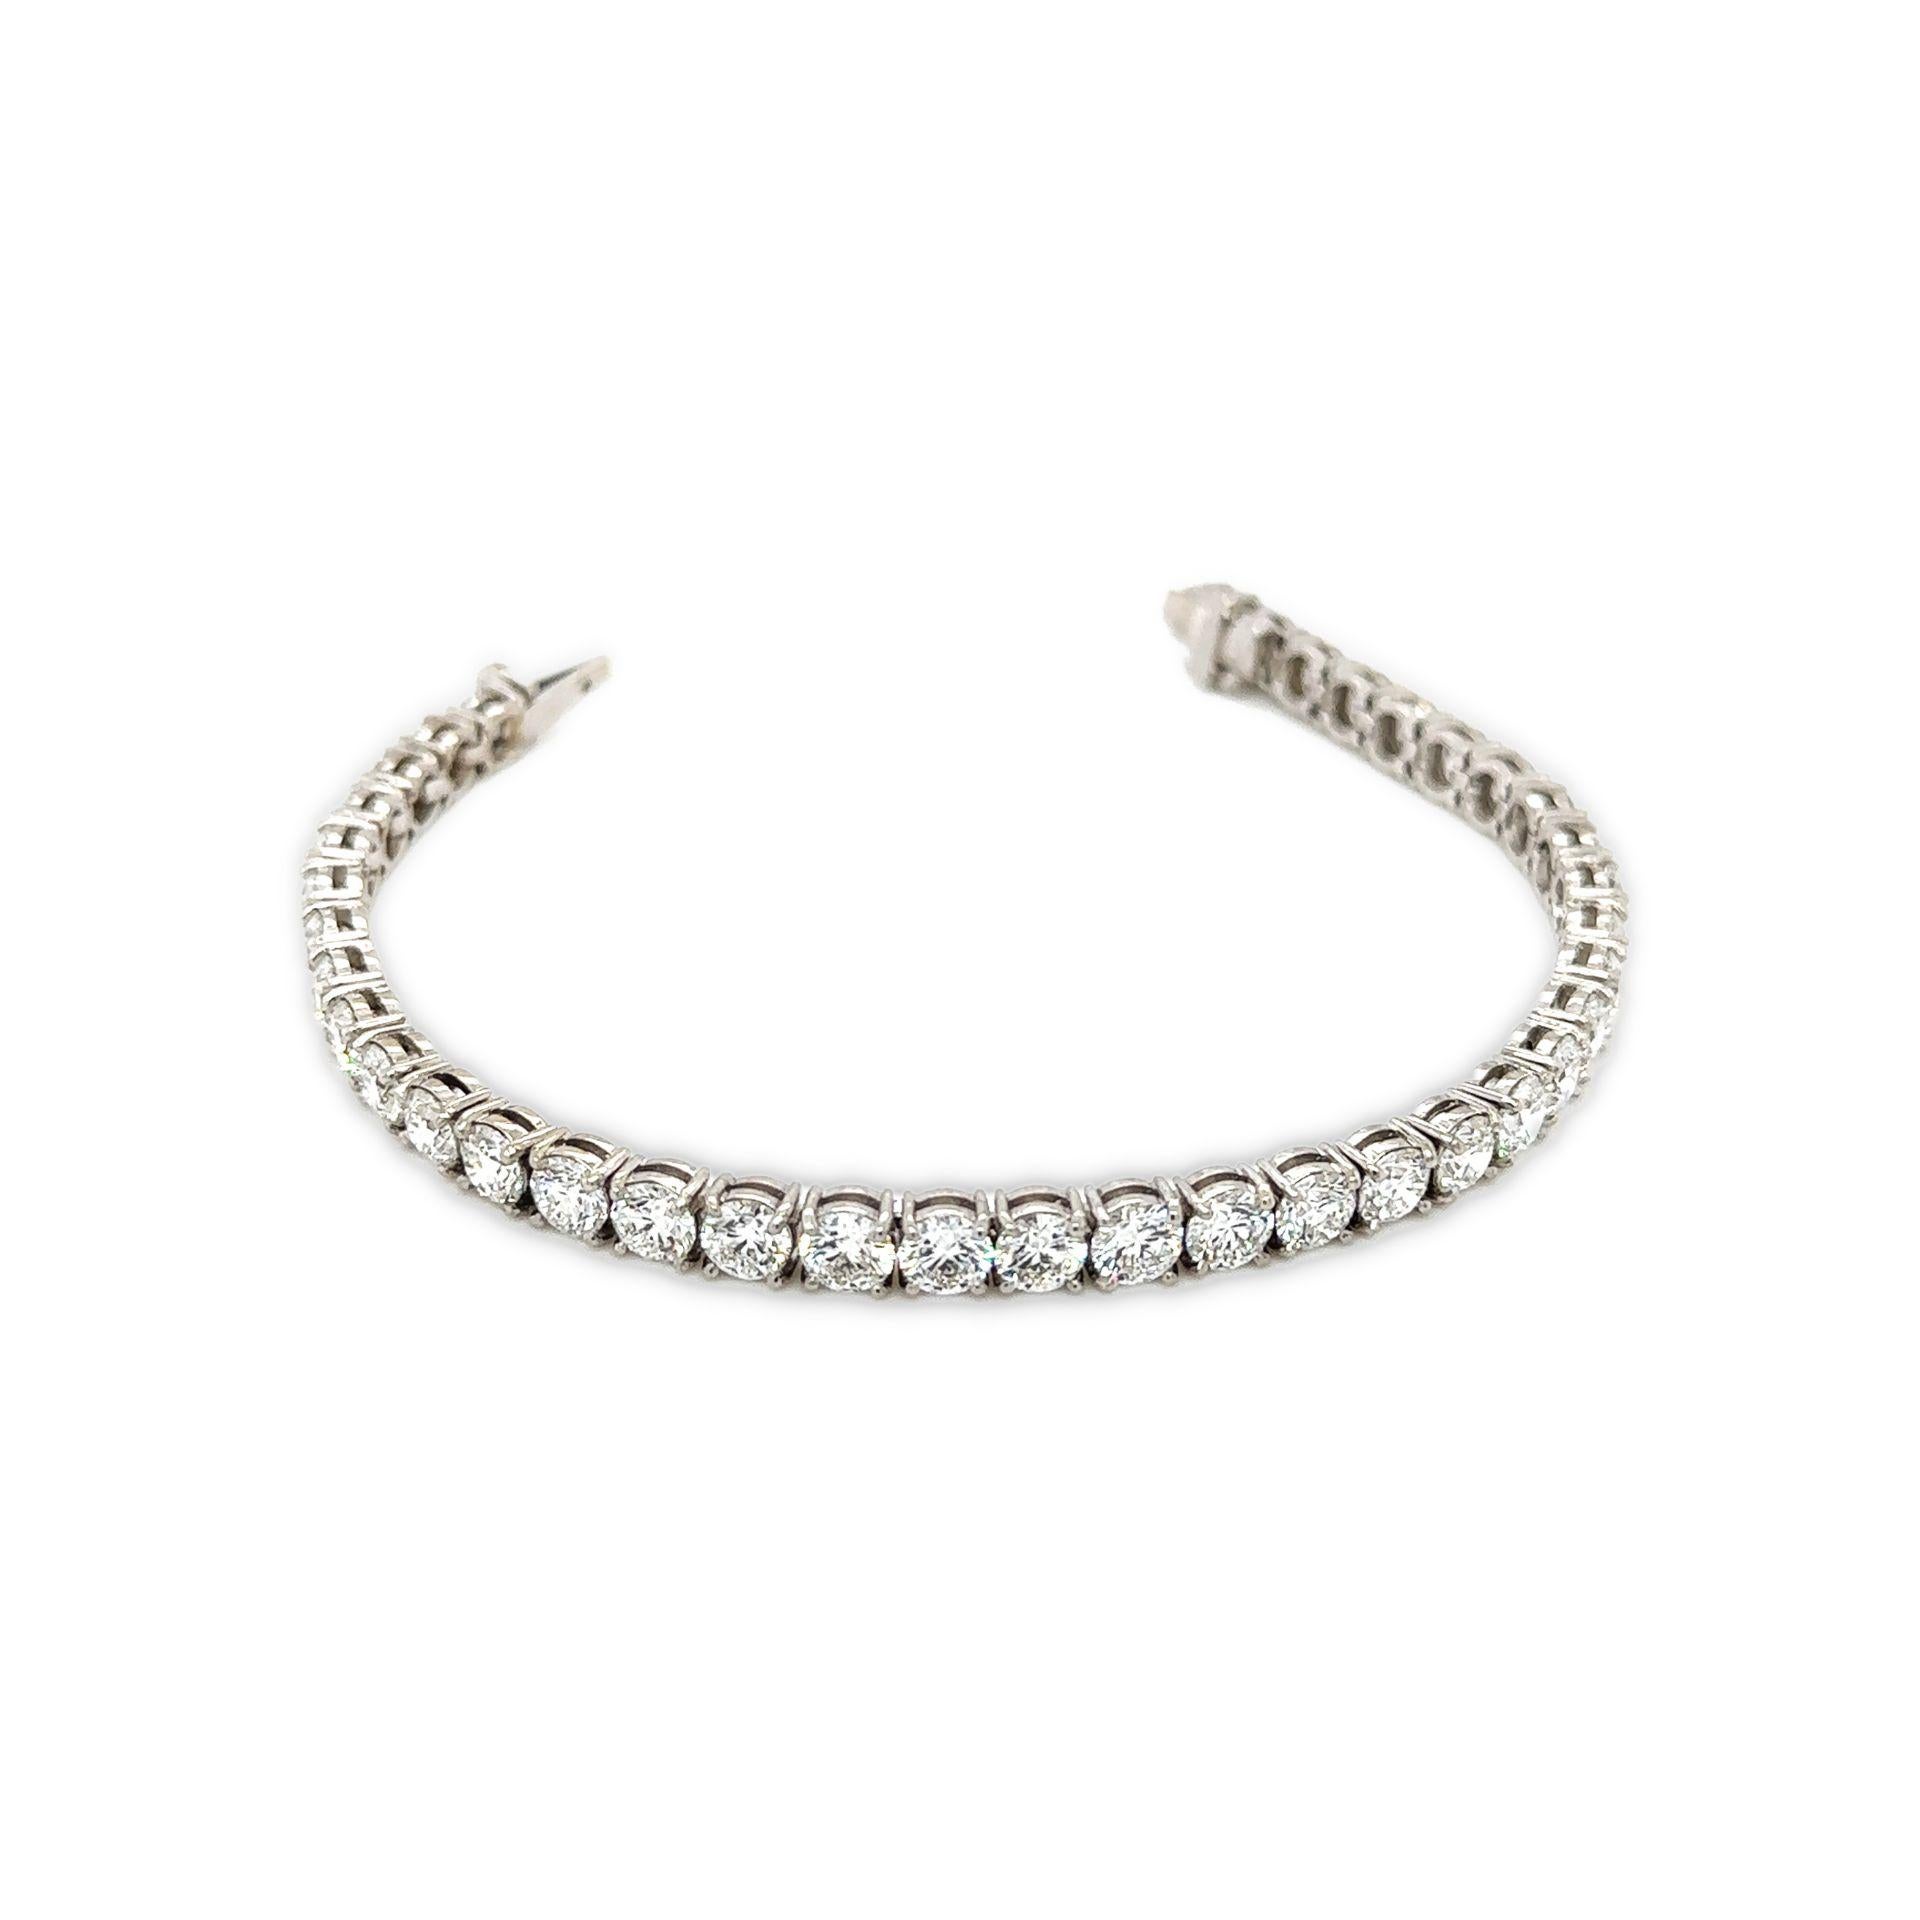 Diamond Tennis Bracelet 11.84 Total Carat Weight 18K White Gold

With Round Diamonds, 0.30-0.35 Carats Each 

Diamonds are DE in Color and VS2/SI2 in Clarity

With GIA Certificates

Total Carat Weight is 11.84 Carats 

4-Prong Setting

Set in 18